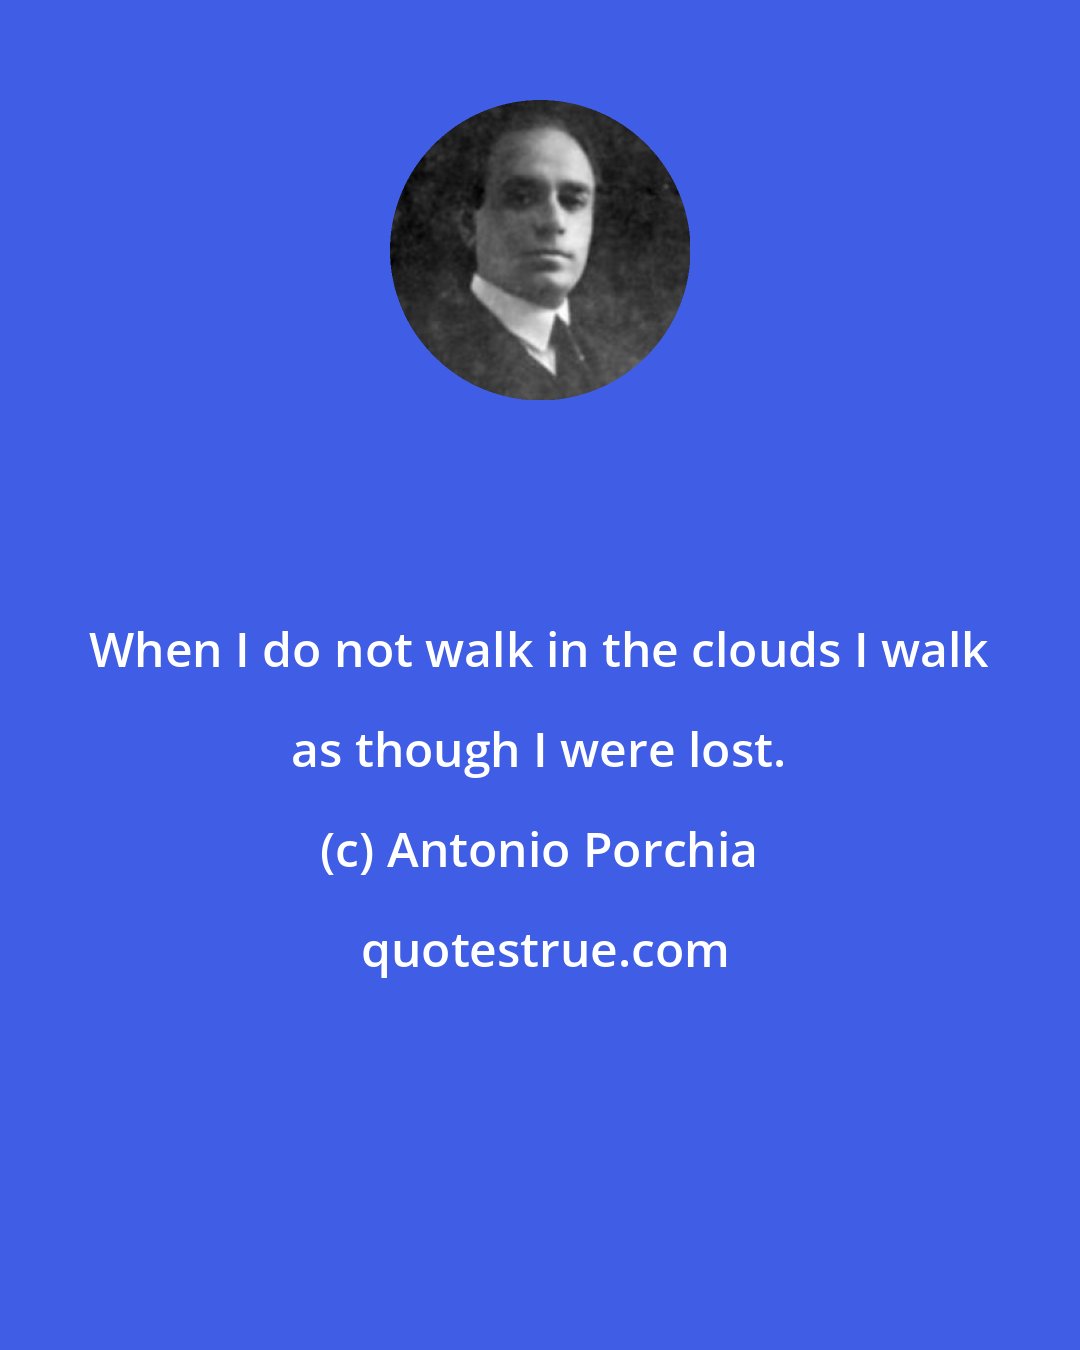 Antonio Porchia: When I do not walk in the clouds I walk as though I were lost.